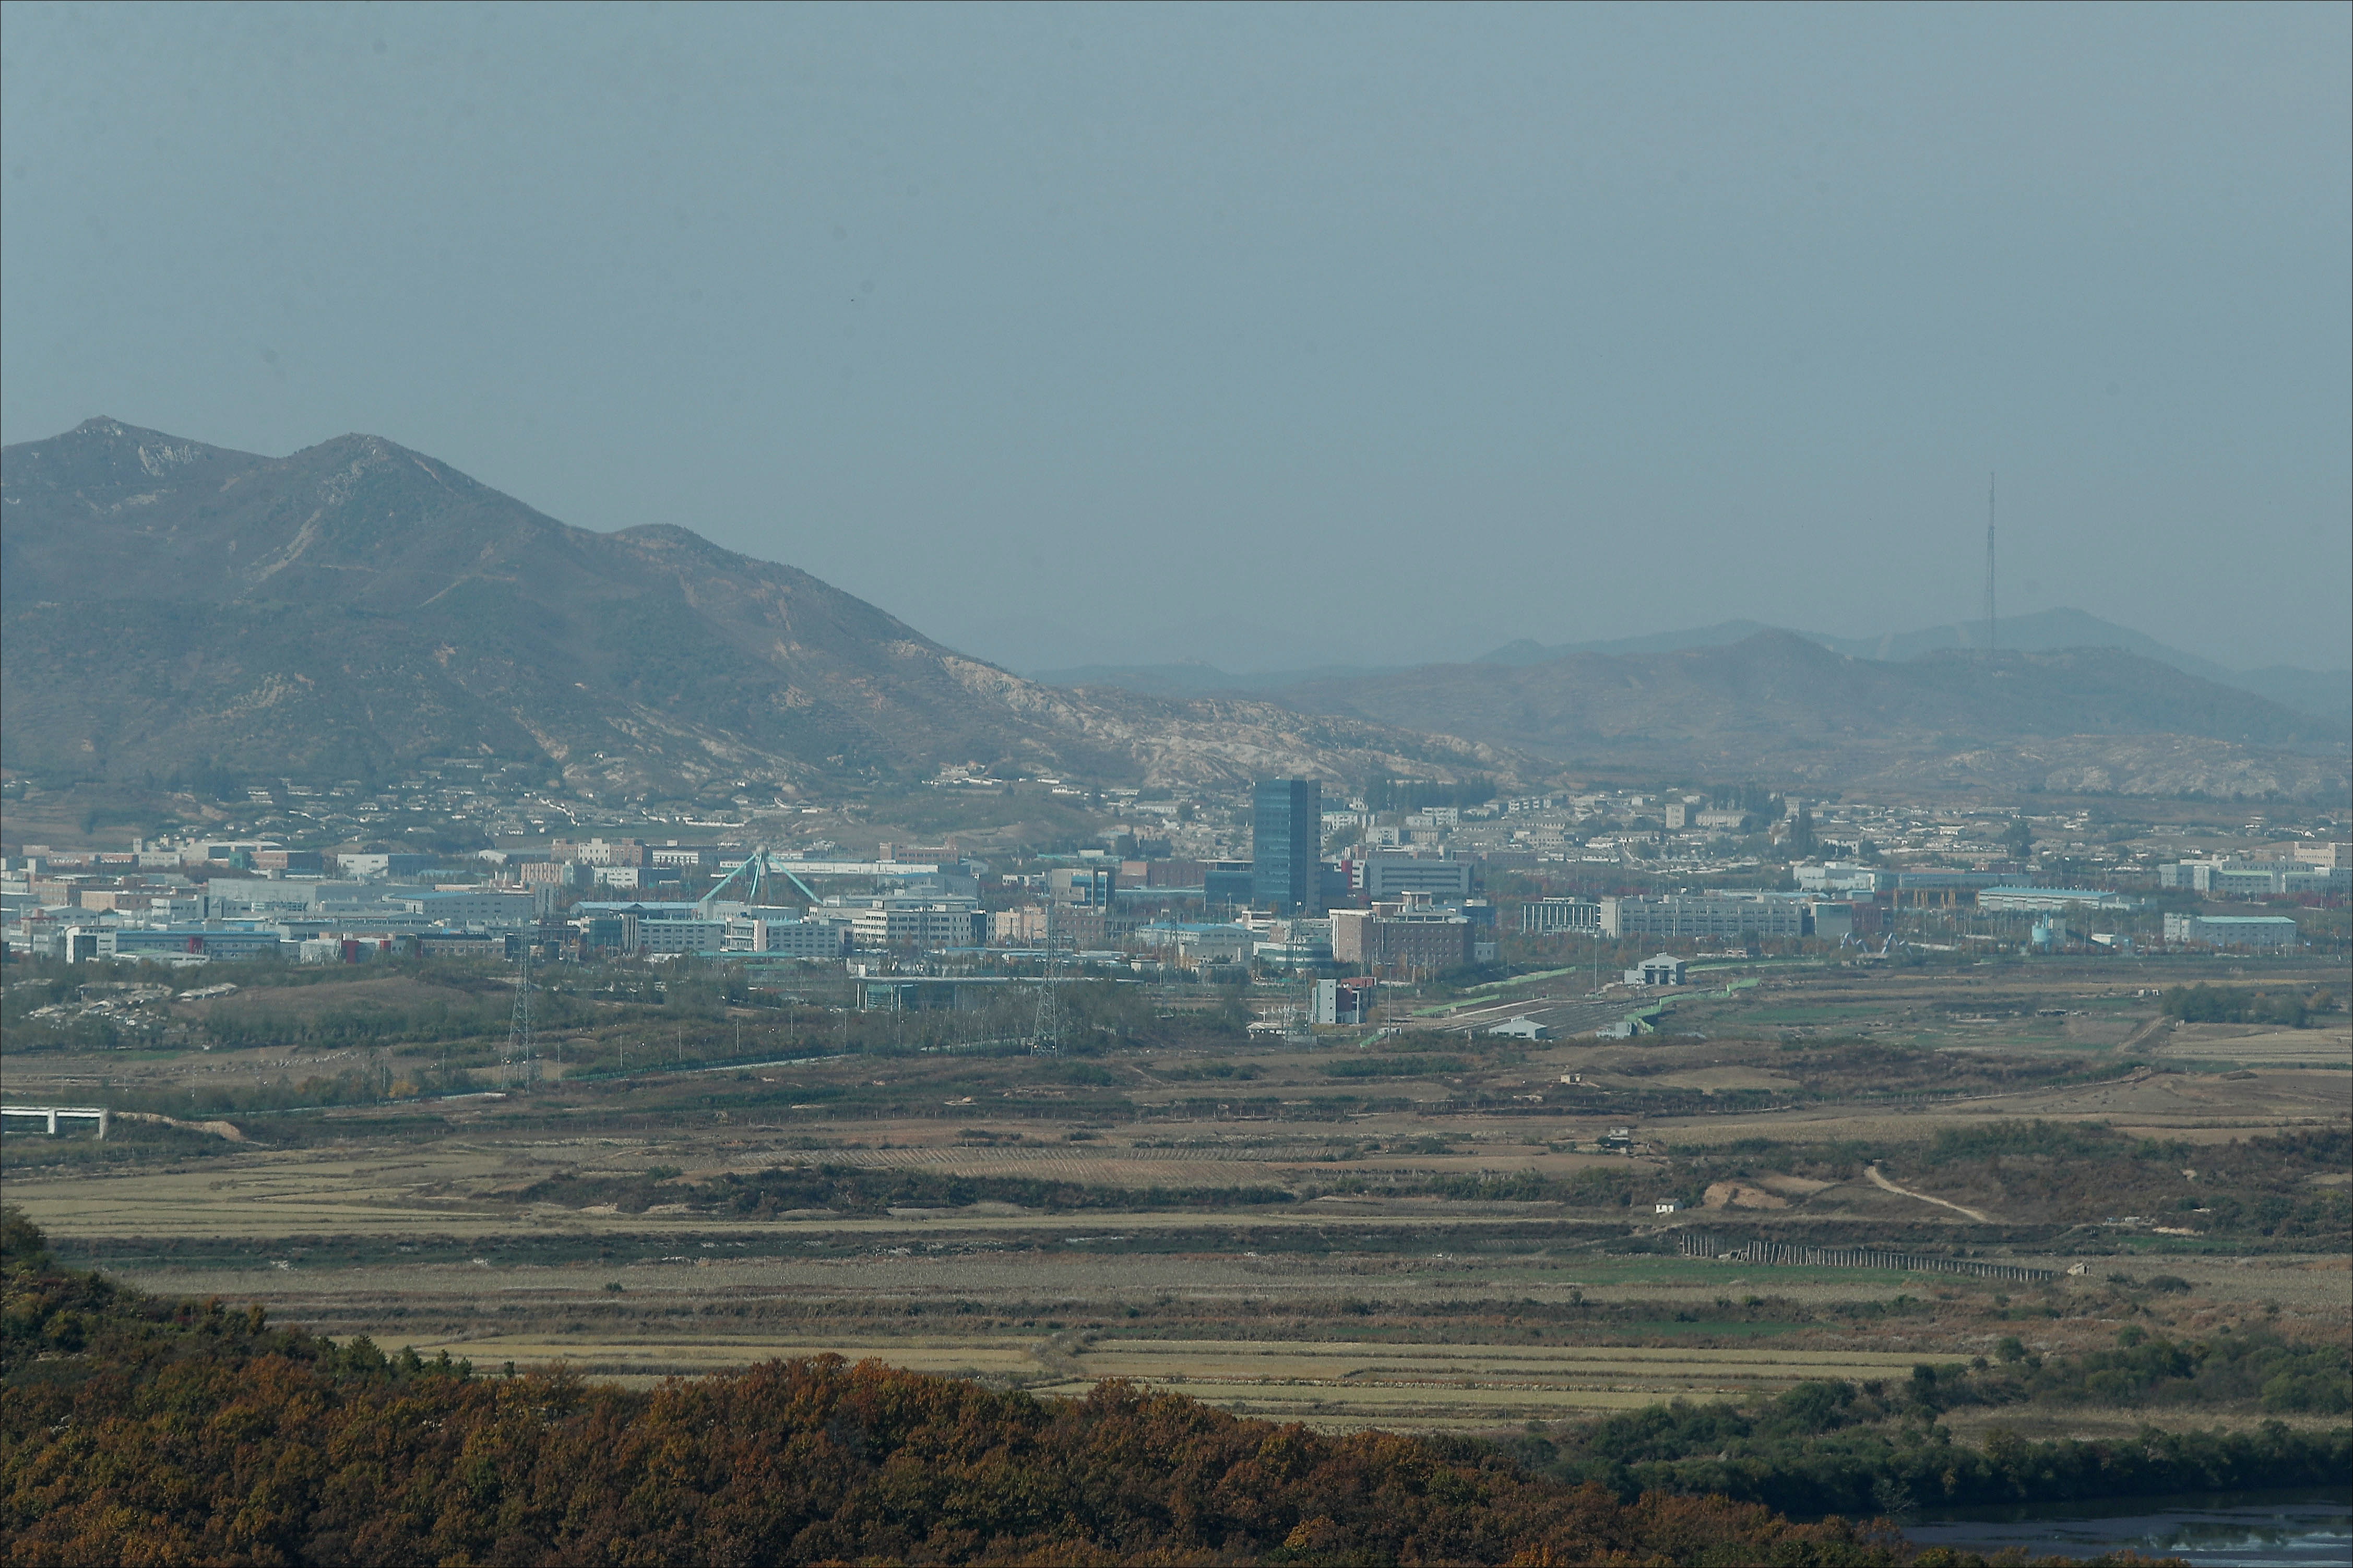 epa07118116 A view of the Kaesong Industrial Complex, an inter-Korean factory park in the North Korean border city of Kaesong, as visible from a South Korean observatory in Paju, South Korea, 25 October 2018, during a visit to the observatory by members of the parliamentary land and transportation committee. South Korea's presidential office said Seoul has no plans to reopen the complex, shuttered in early 2016 in response to the North's nuclear and missile tests, unless international sanctions are lifted first.  EPA/YONHAP / POOL SOUTH KOREA OUT